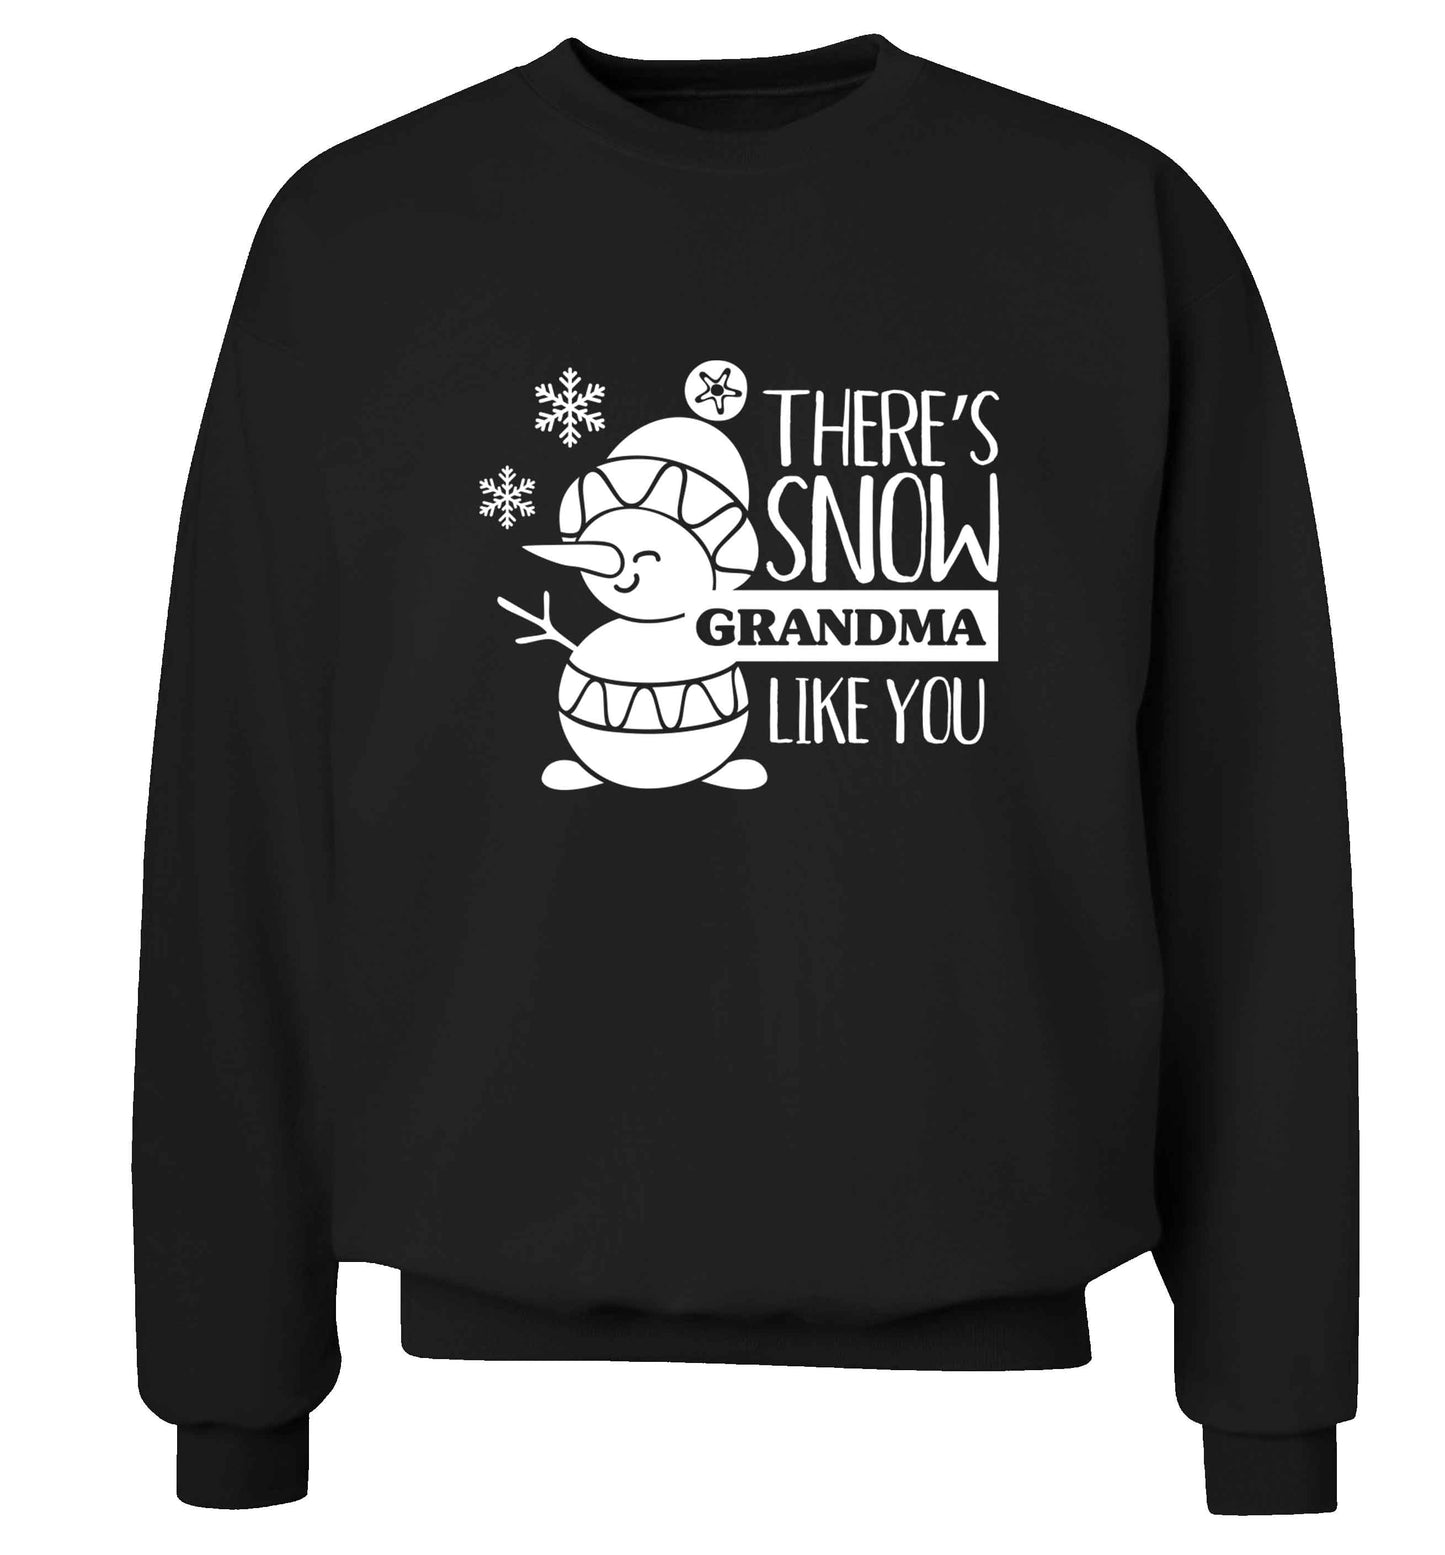 There's snow grandma like you adult's unisex black sweater 2XL